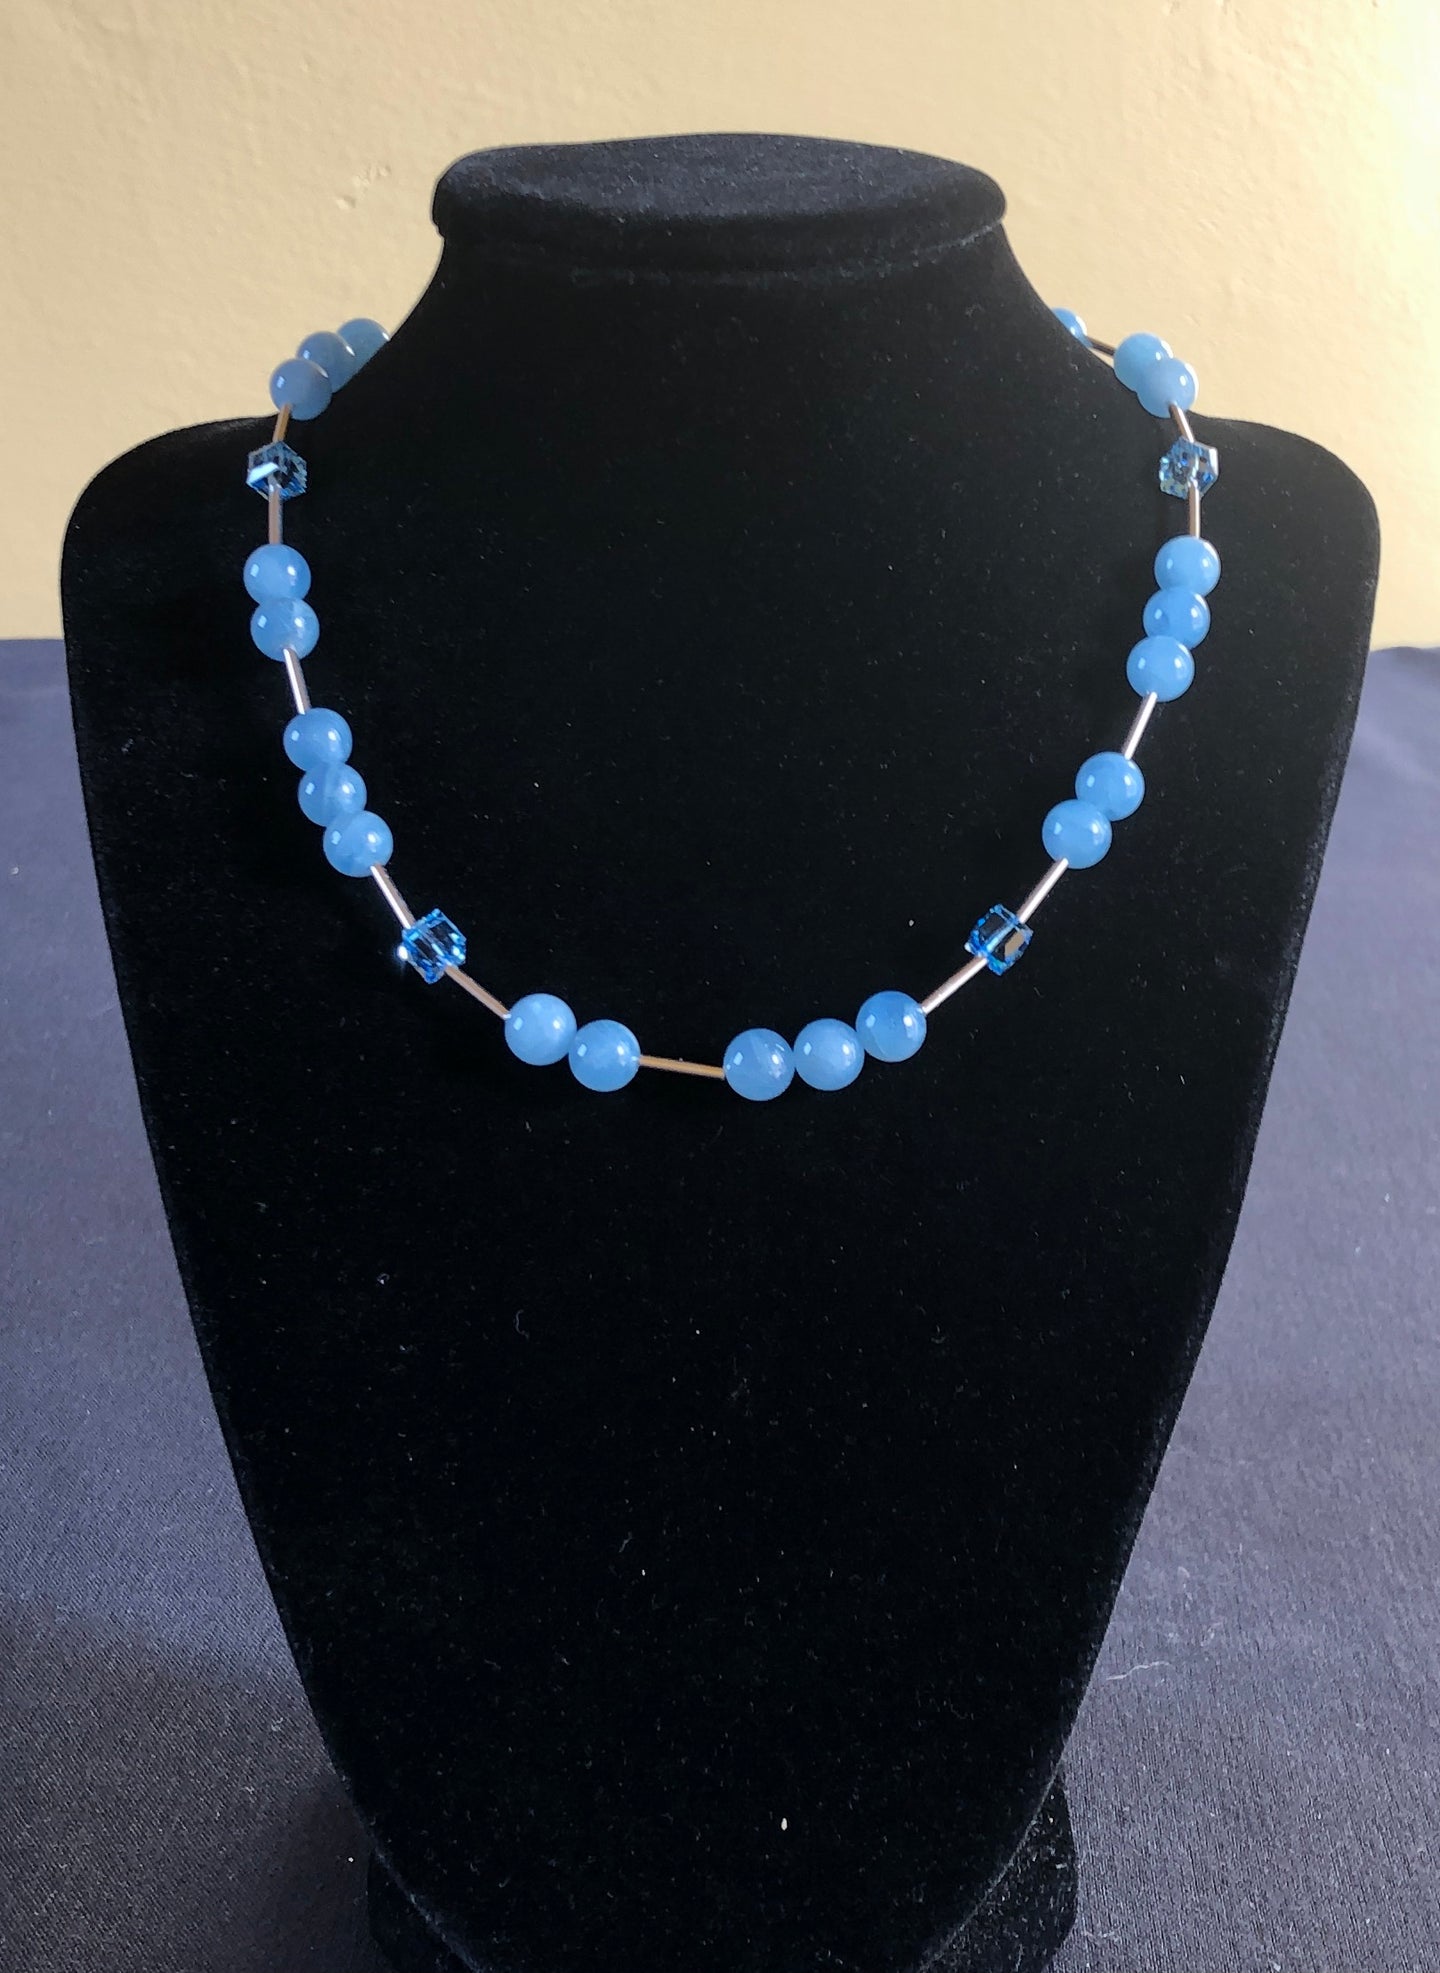 Necklace - Aquamarine, Sterling Silver Tubes